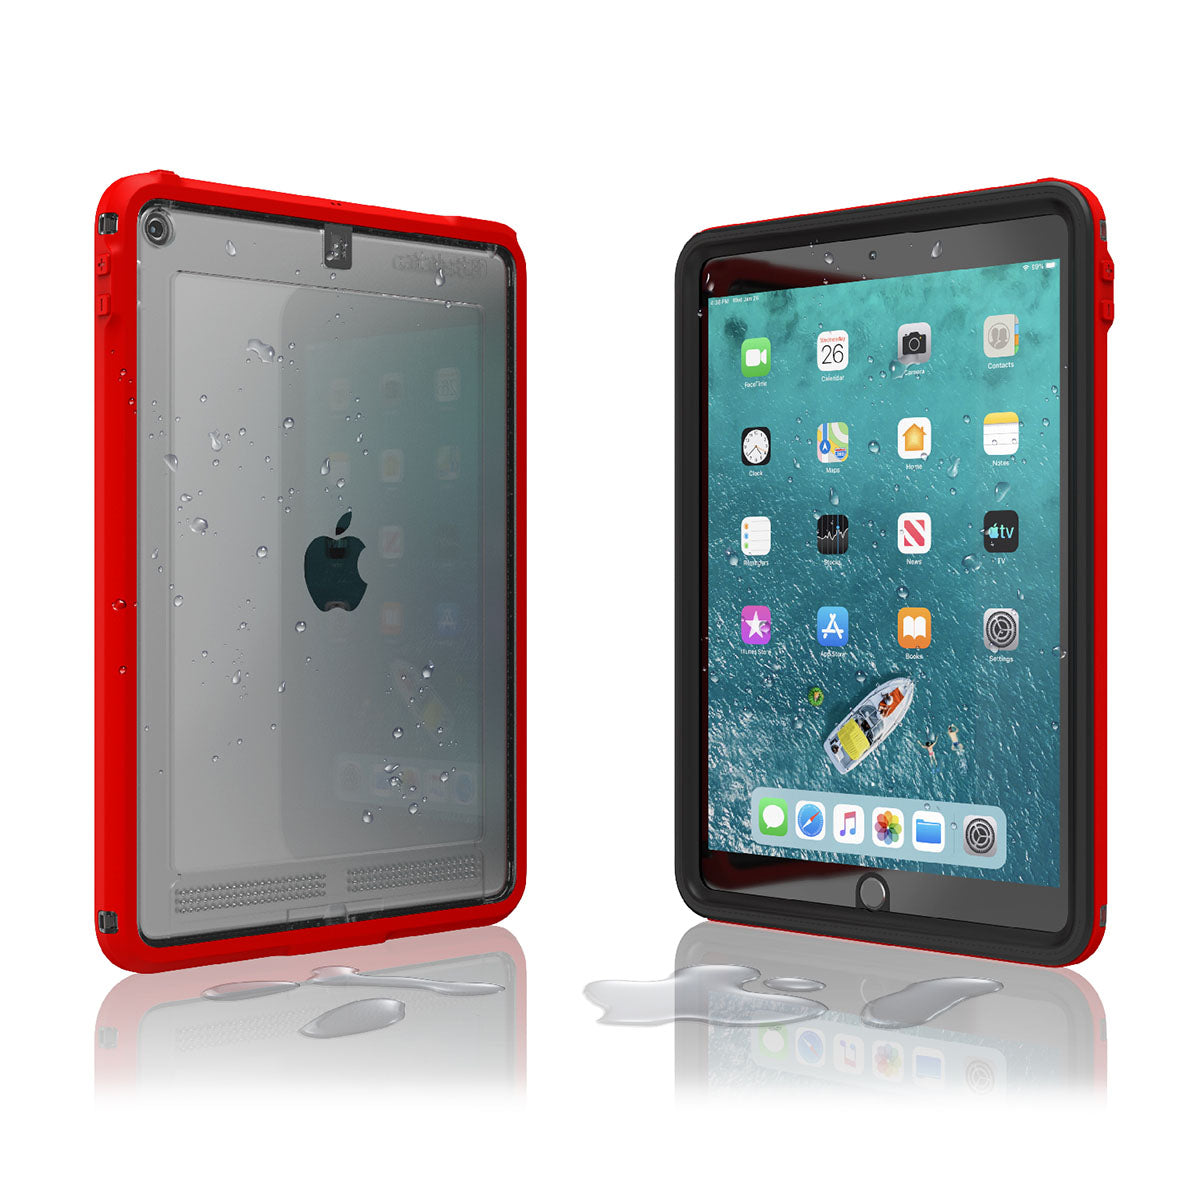 catalyst ipad air gen 3 10.5" waterproof case flame red front and back view with water droplets